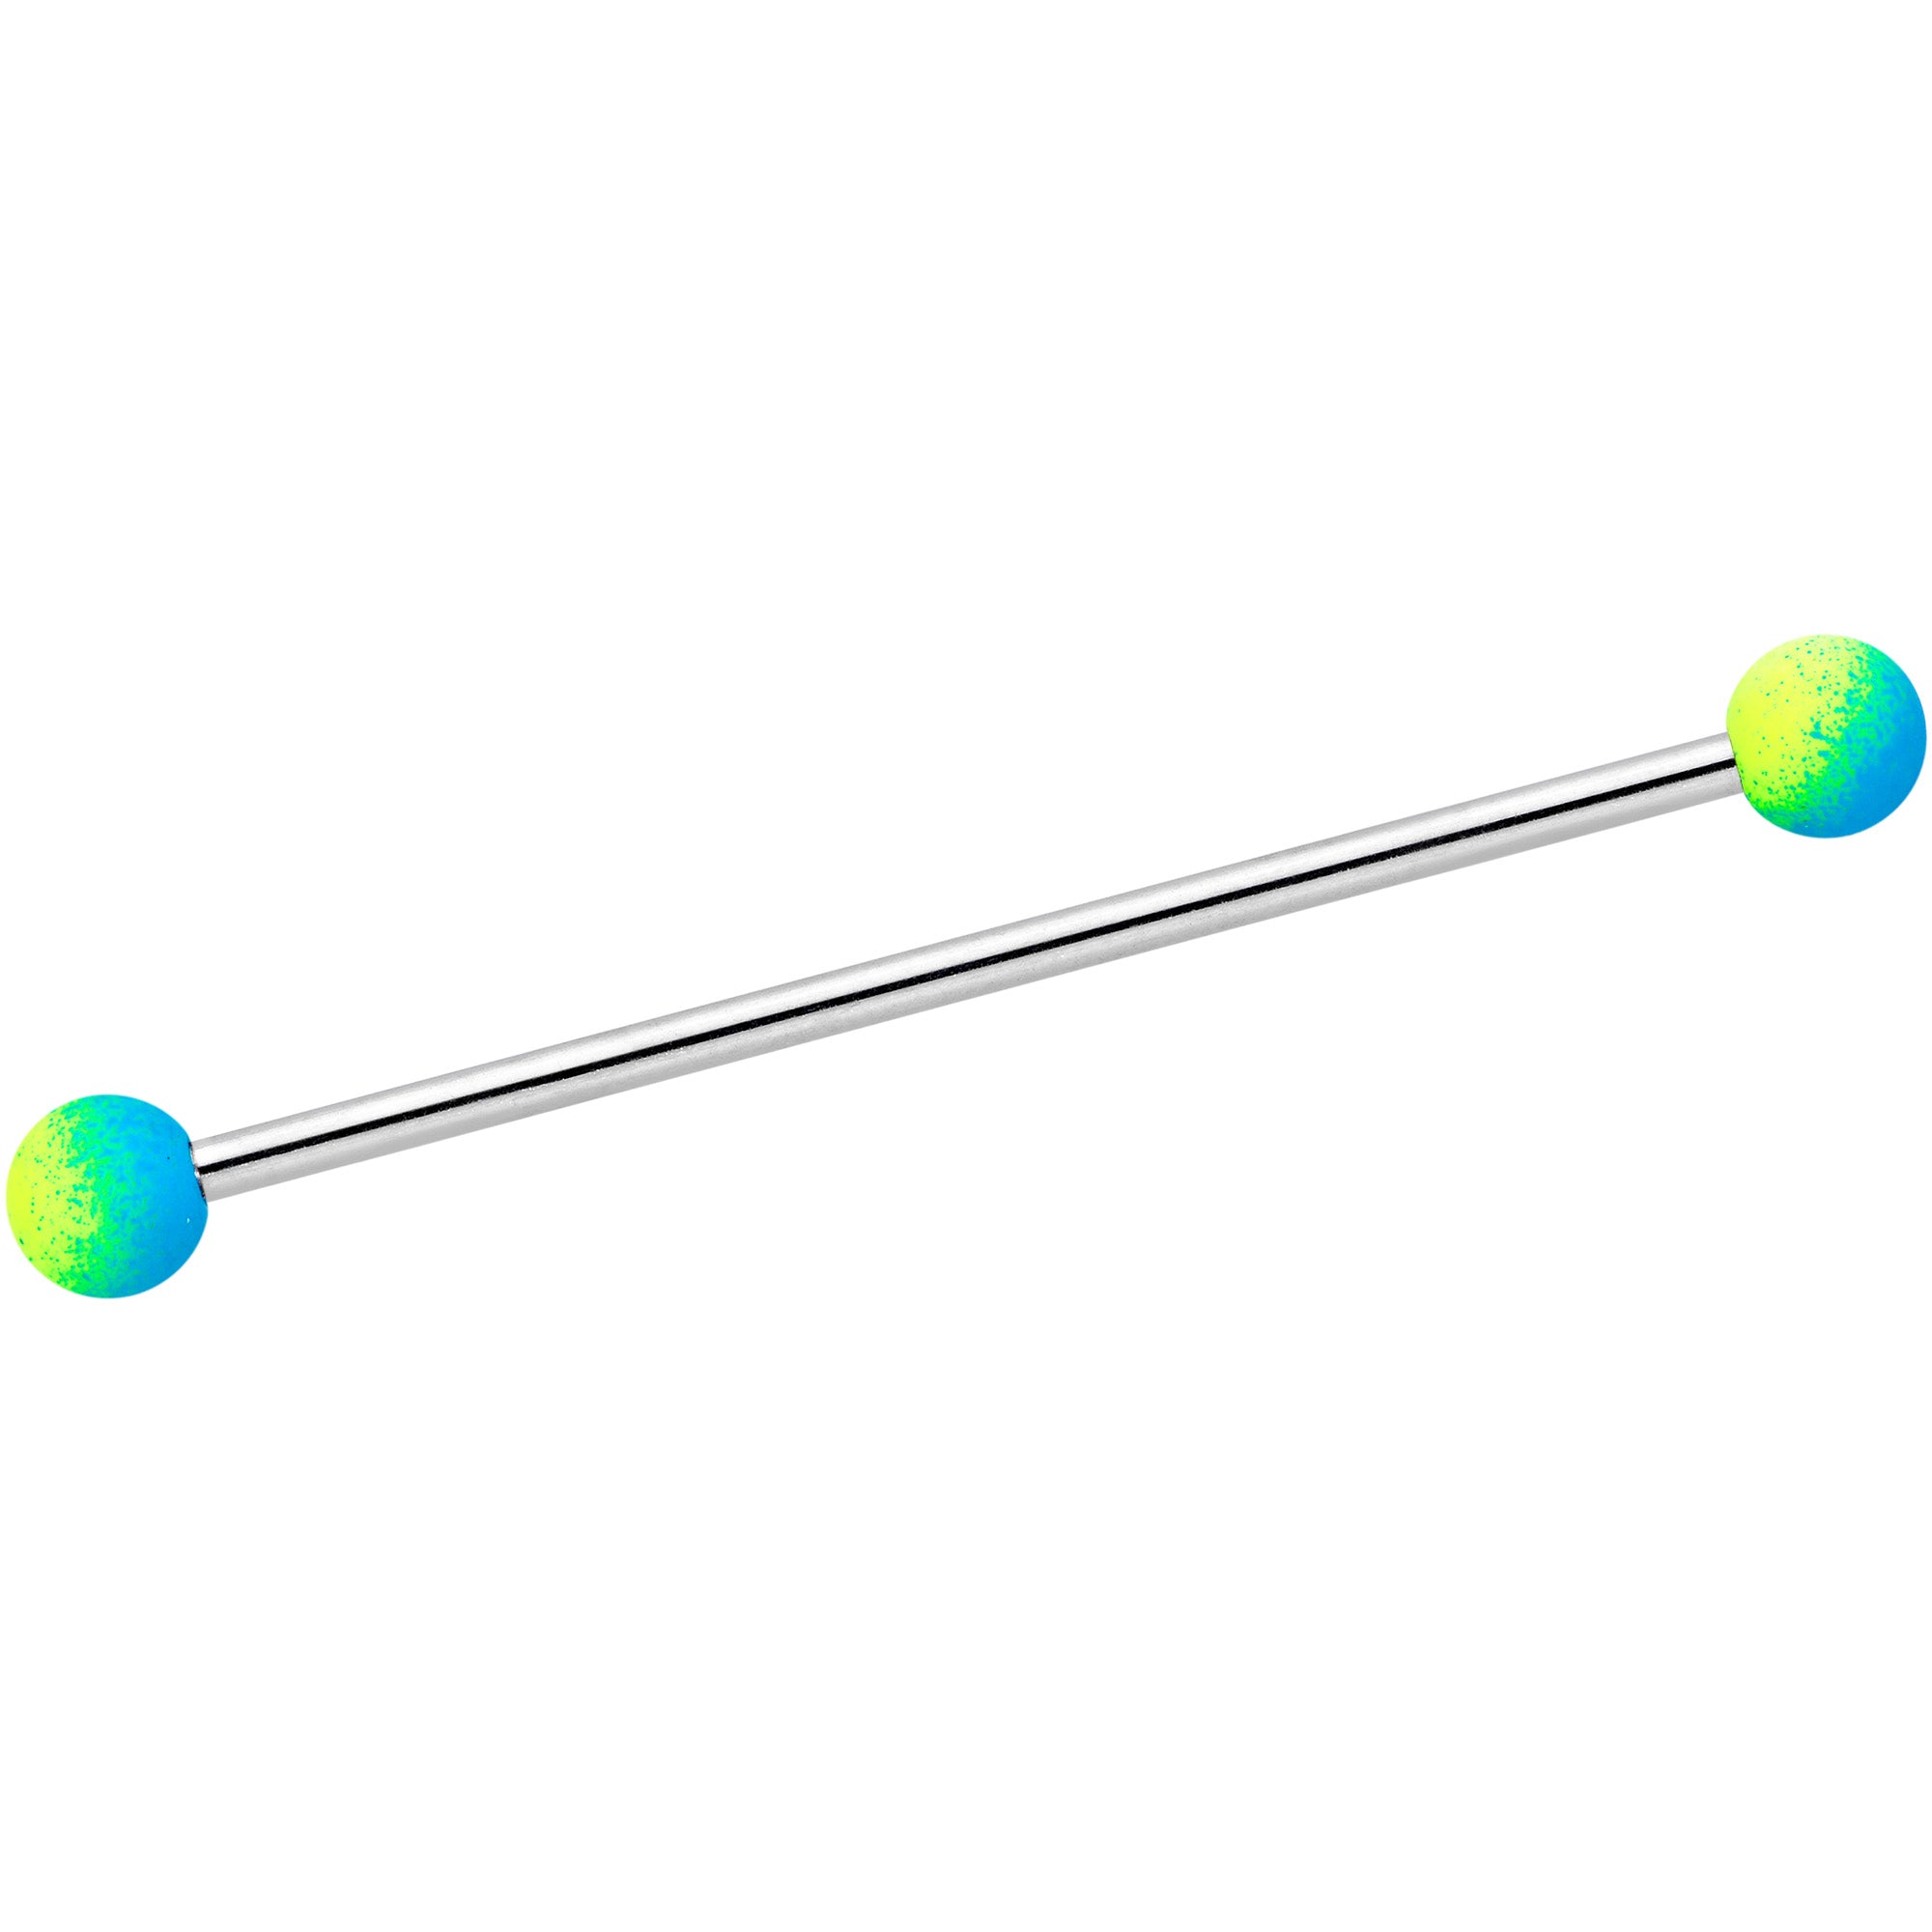 14 Gauge Blue Green Ombre Soft Finish Industrial Barbell 38mm